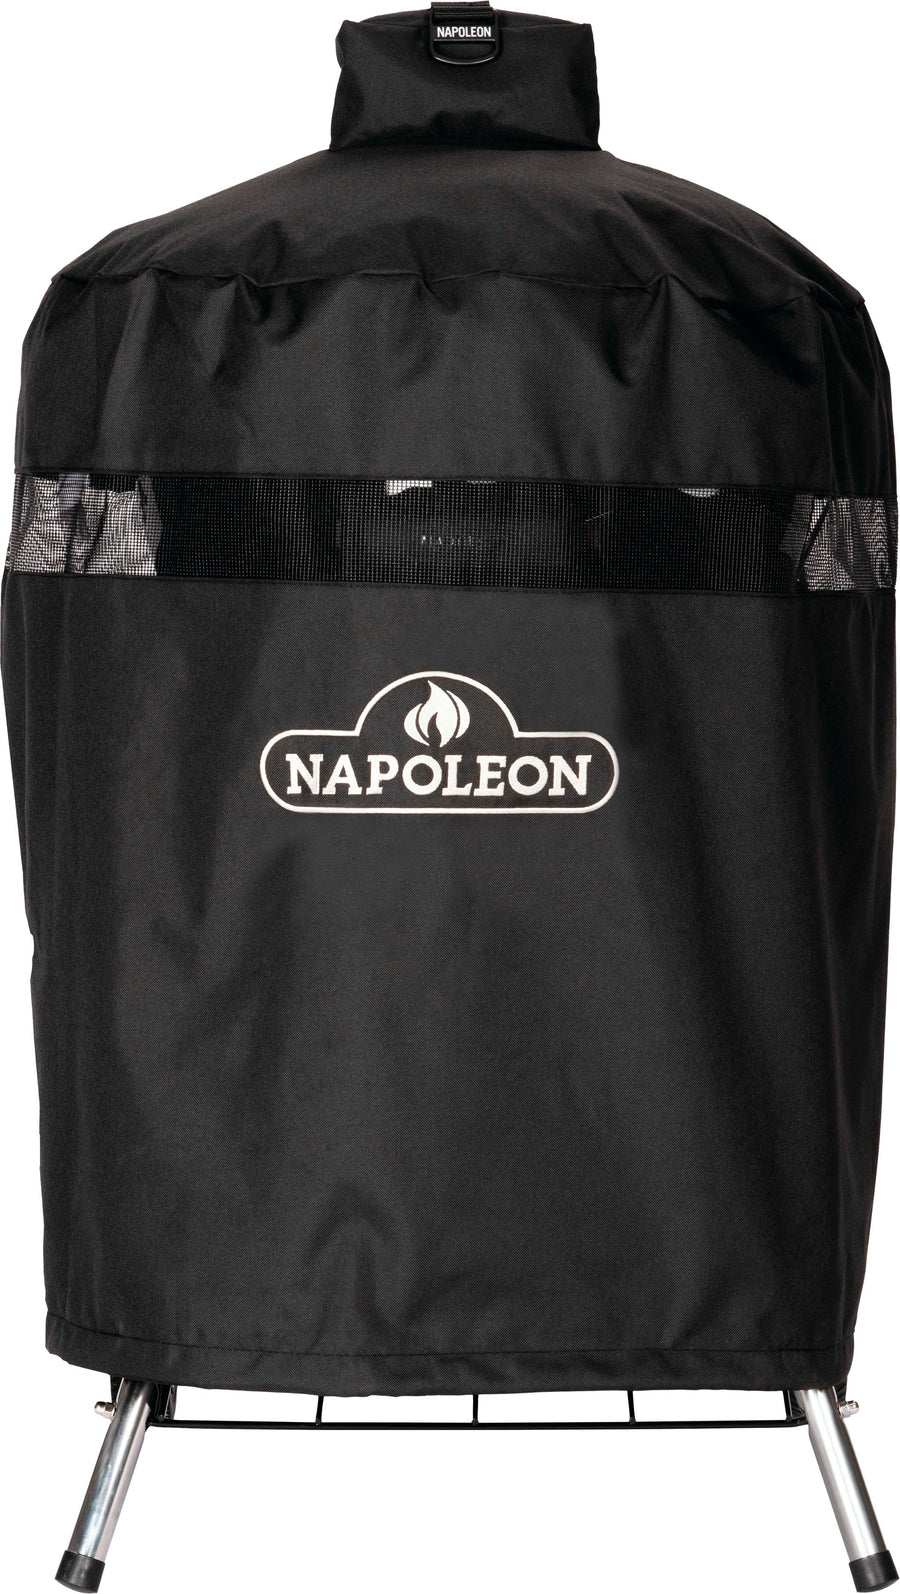 Napoleon - 18" Charcoal Kettle Grill with Legs Premium Cover - Black_0